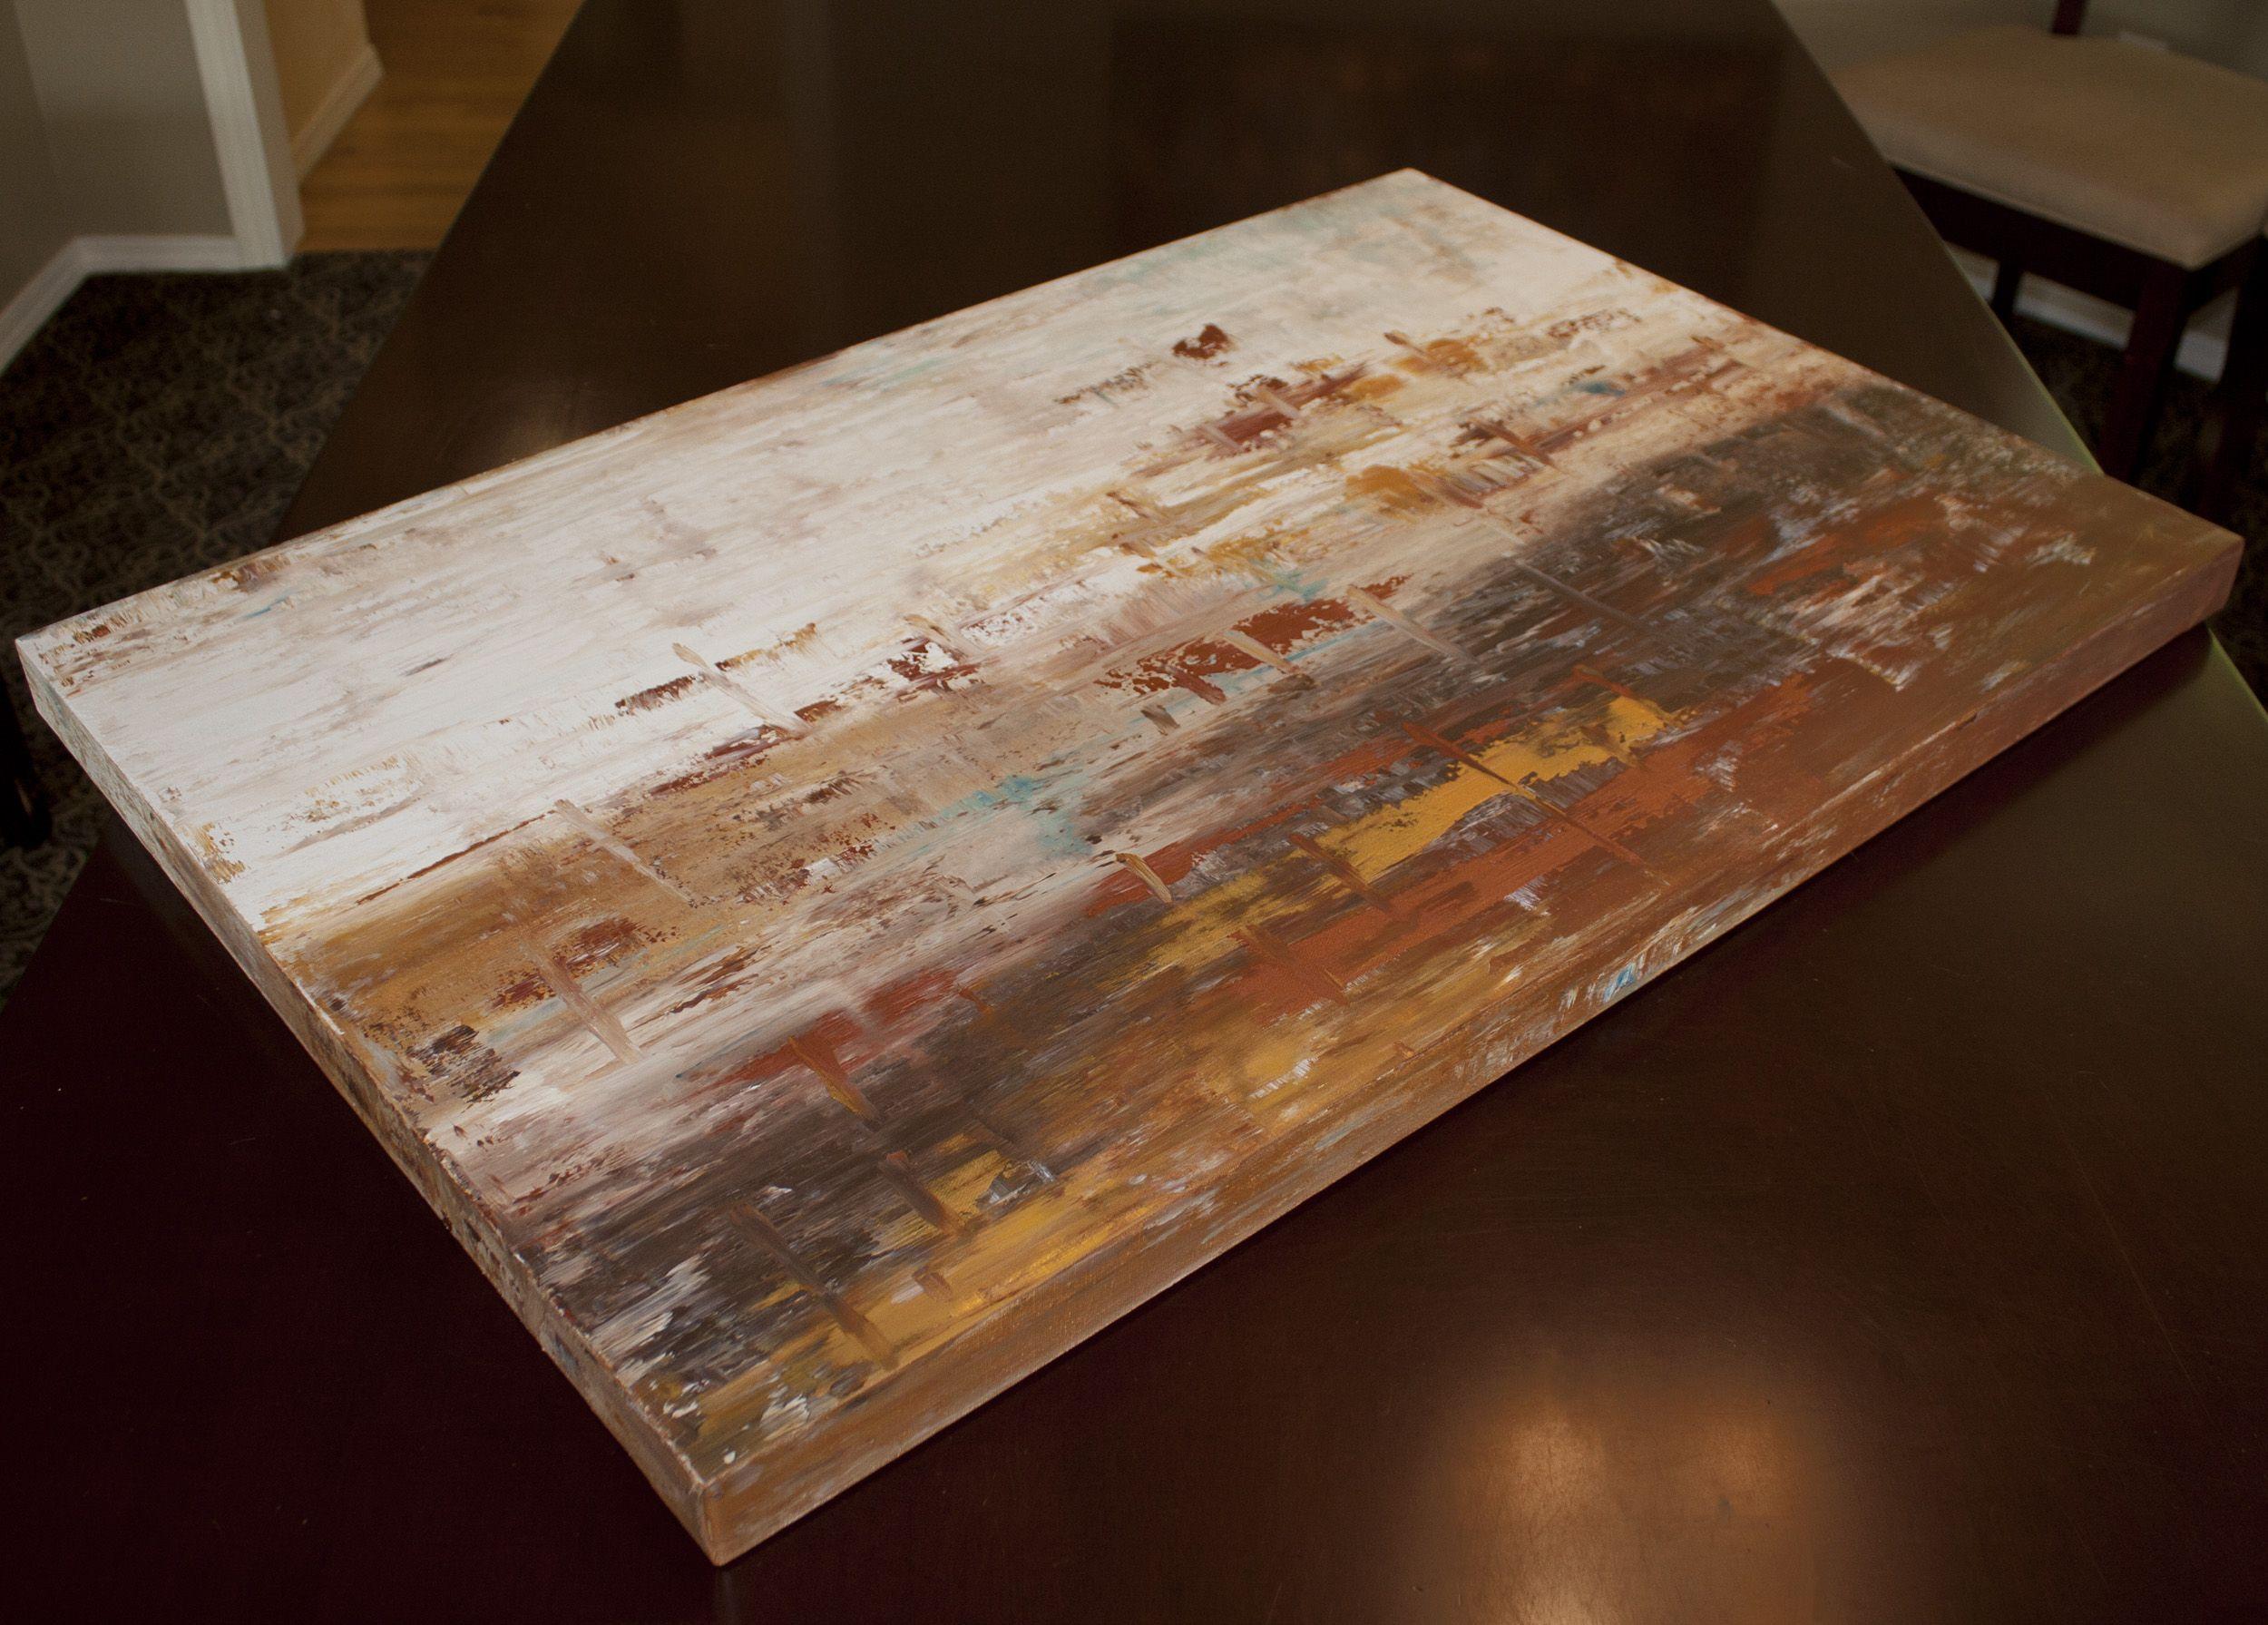 Ascension 7 is an original painting, created with acrylic paint on gallery-wrapped canvas. It has a width of 36 inches and a height of 24 inches with a depth of 1.5 inches (24x36x1.5).     The colors used in the painting are white, brown, rust red,